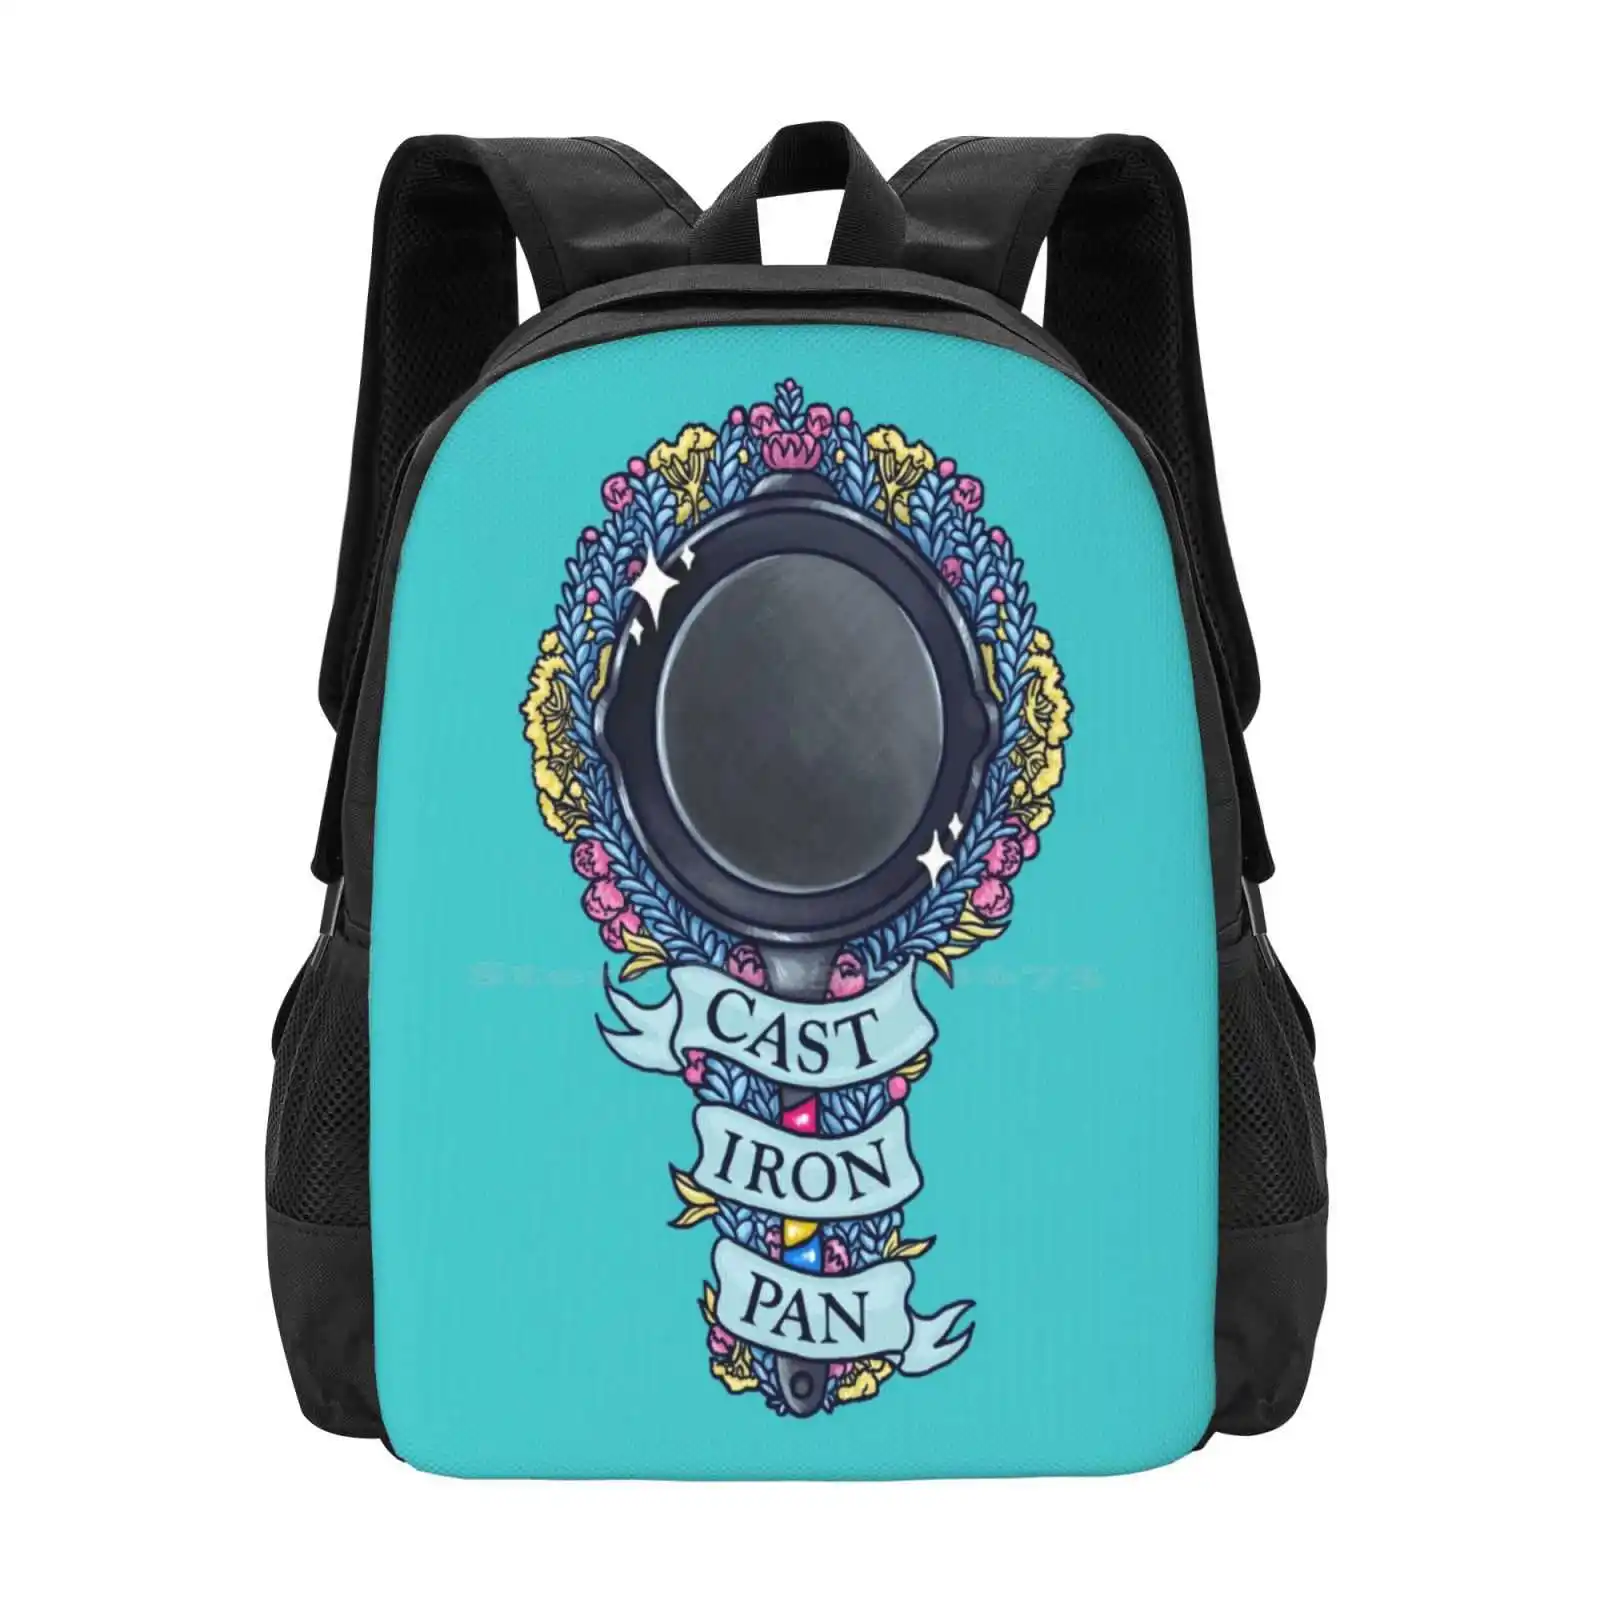 

Cast Iron Pan Hot Sale Backpack Fashion Bags Pansexuality Lgbtq Queer Pride Puns Joke Flowers Rosemary Gay Ribbons Frying Pan